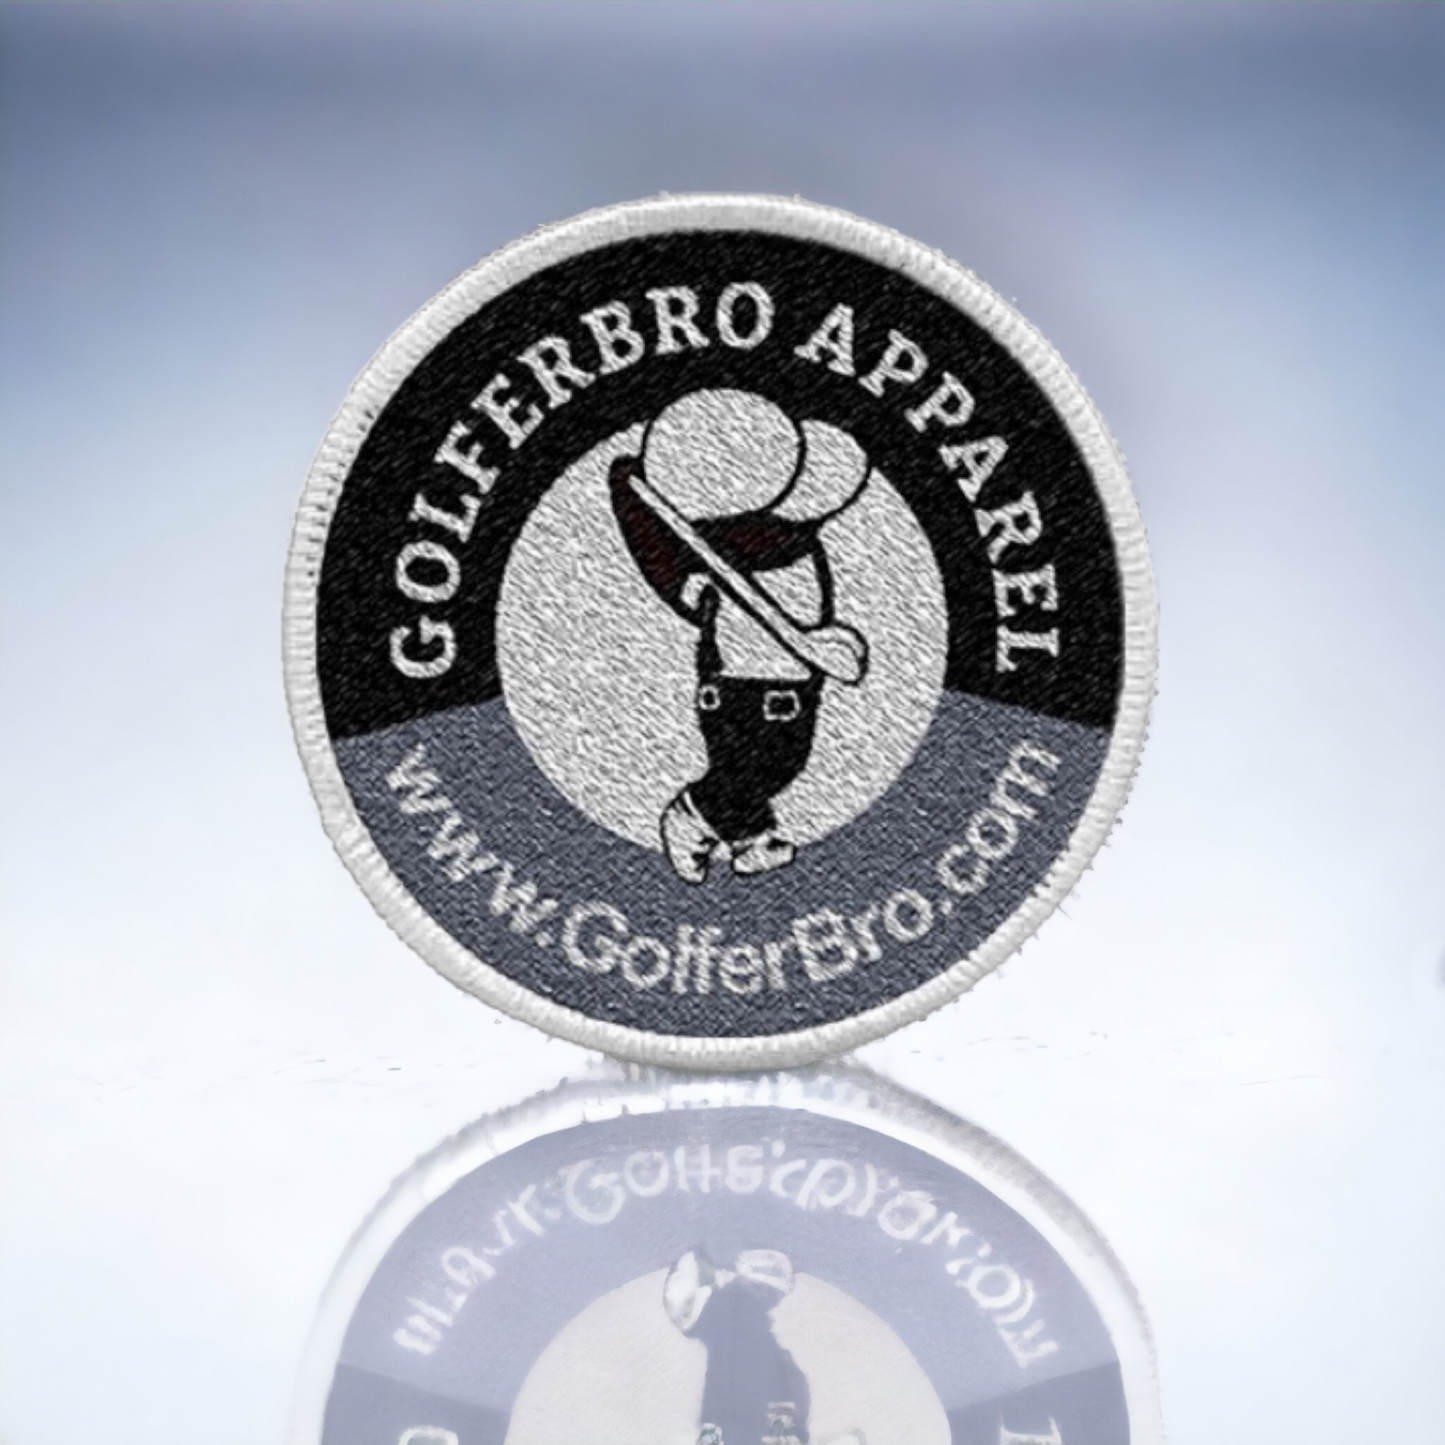 Golfer Bro Patches